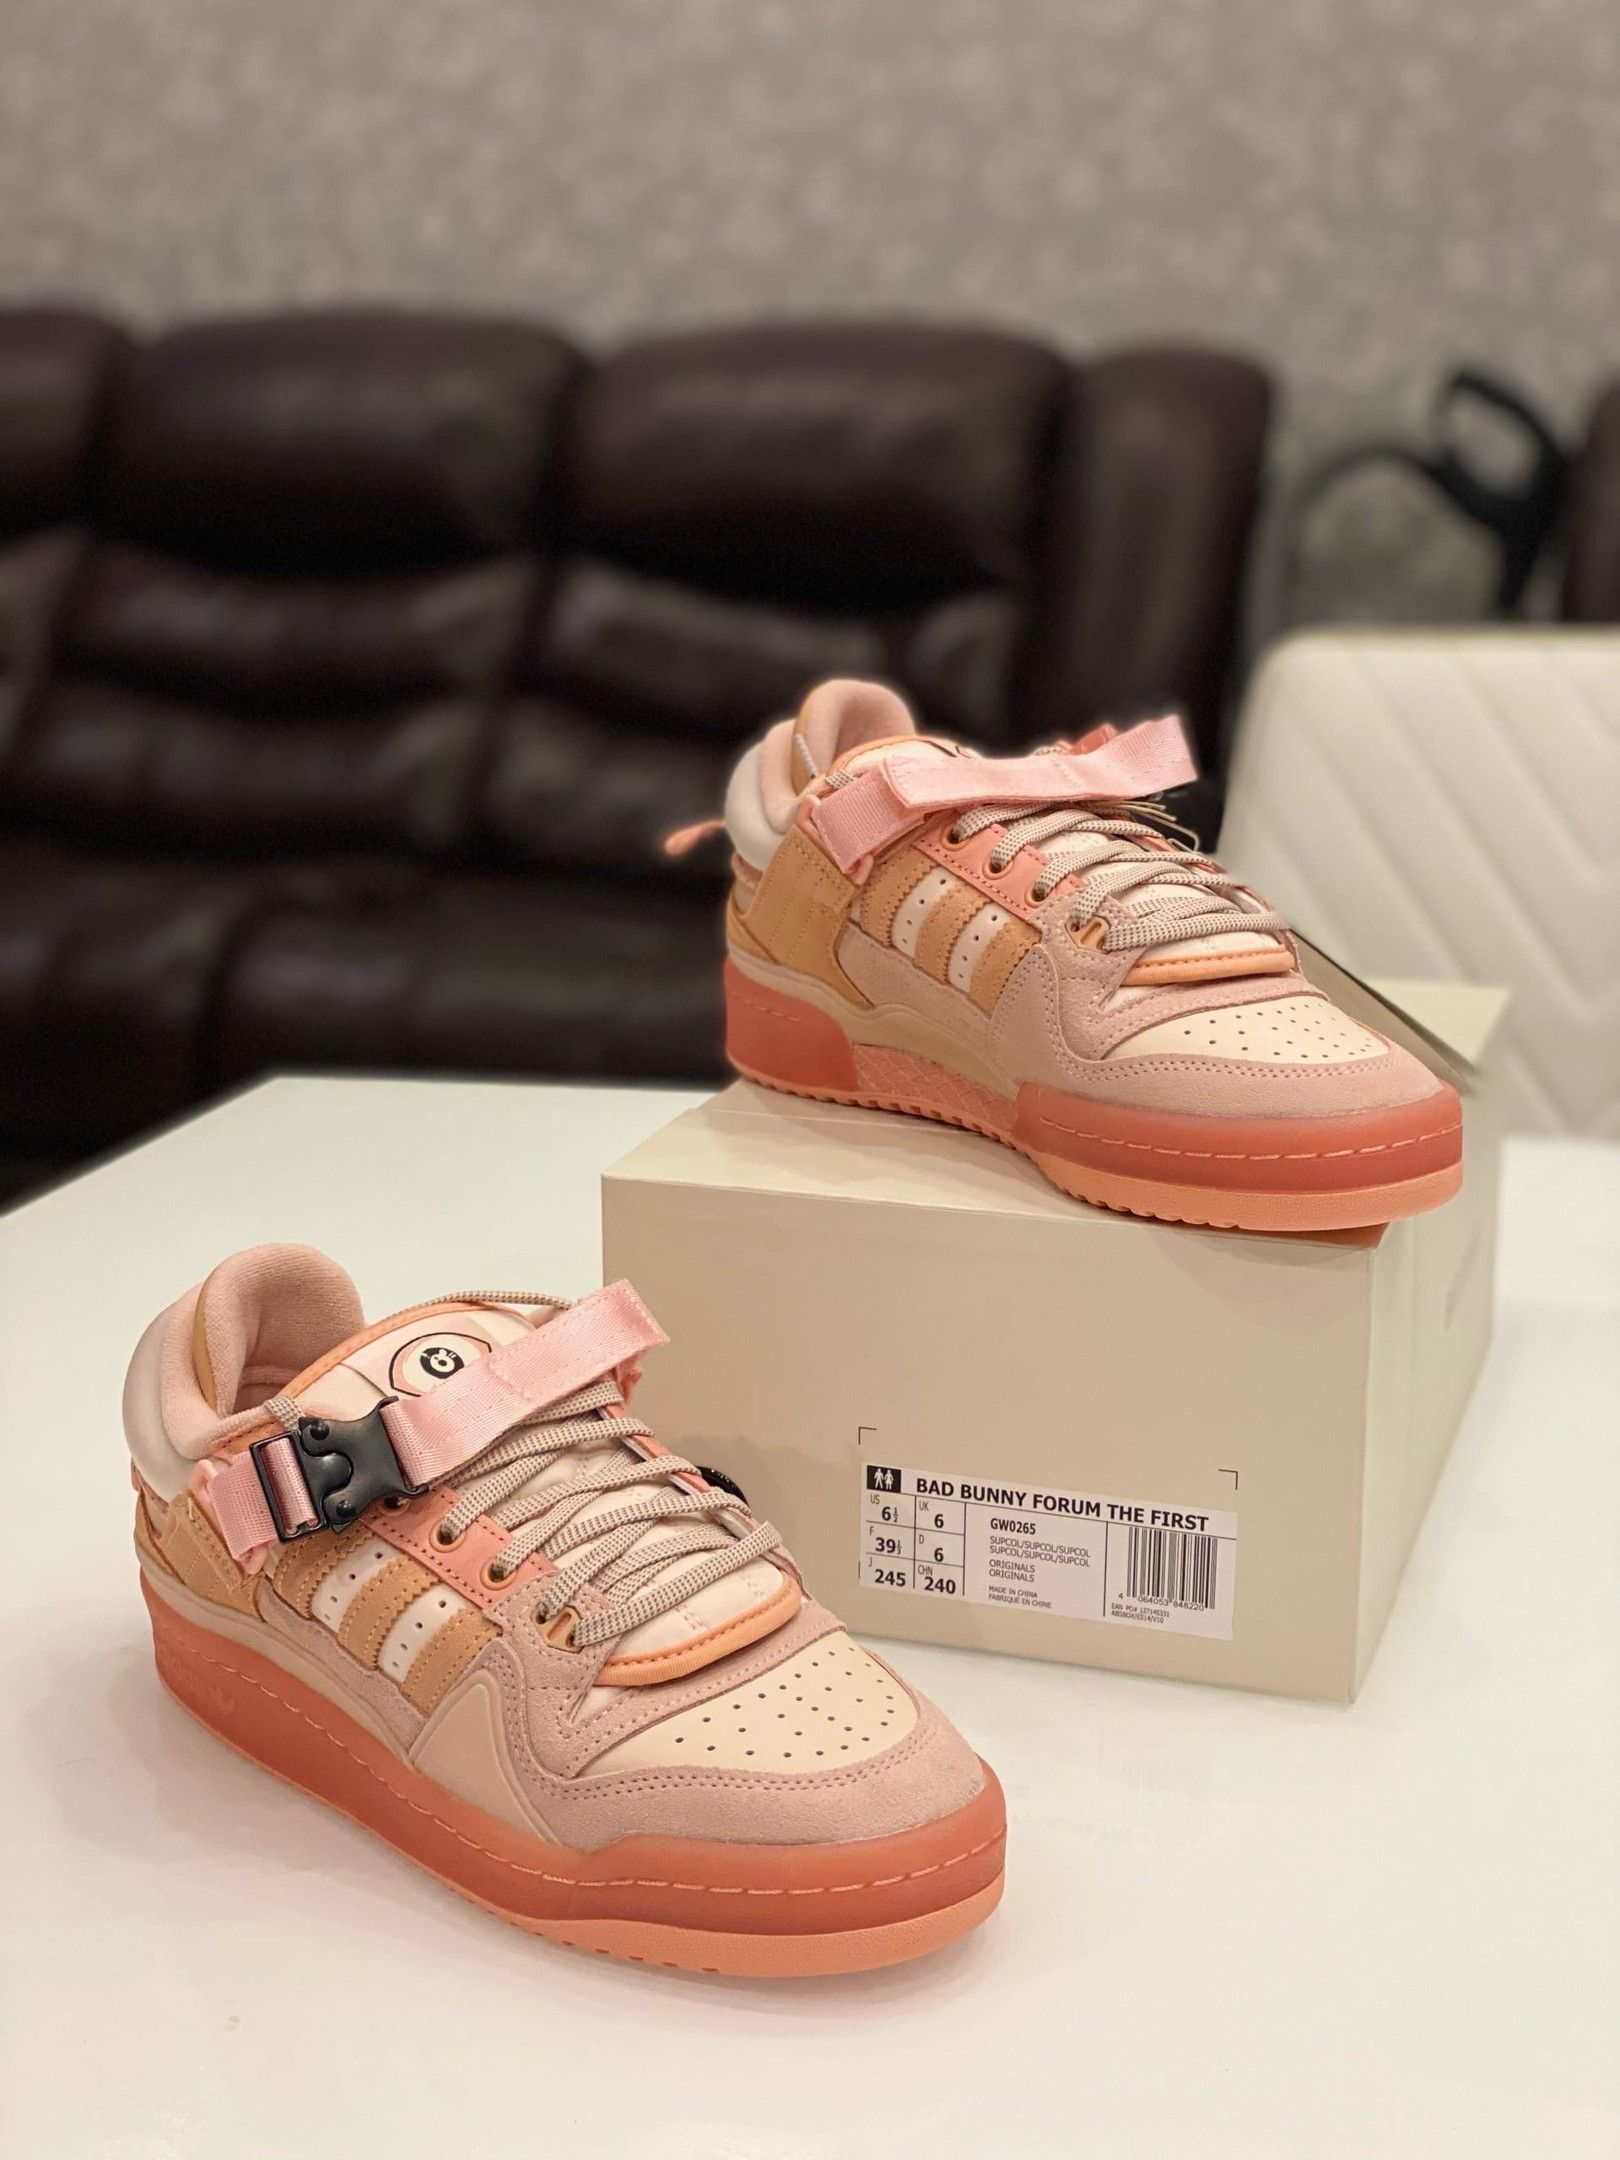 Adidas adidas Forum Low Bad Bunny Pink Easter Egg | Grailed